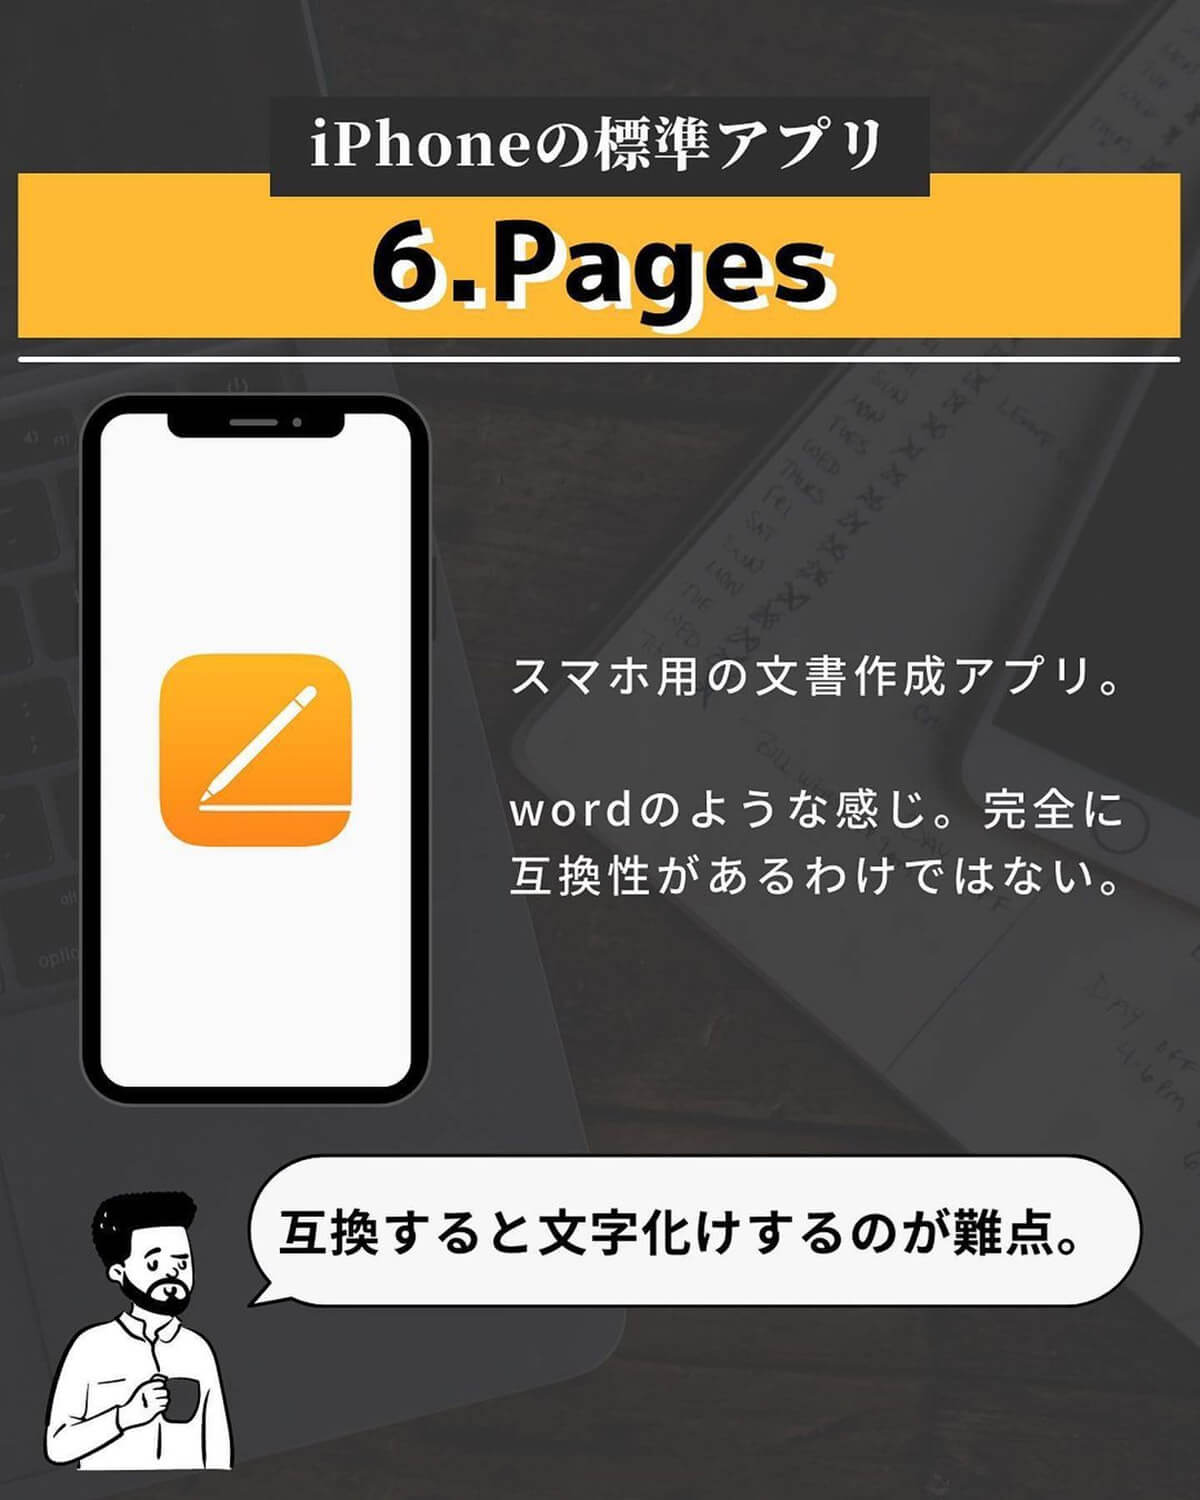 iPhoneの標準アプリ「Pages」